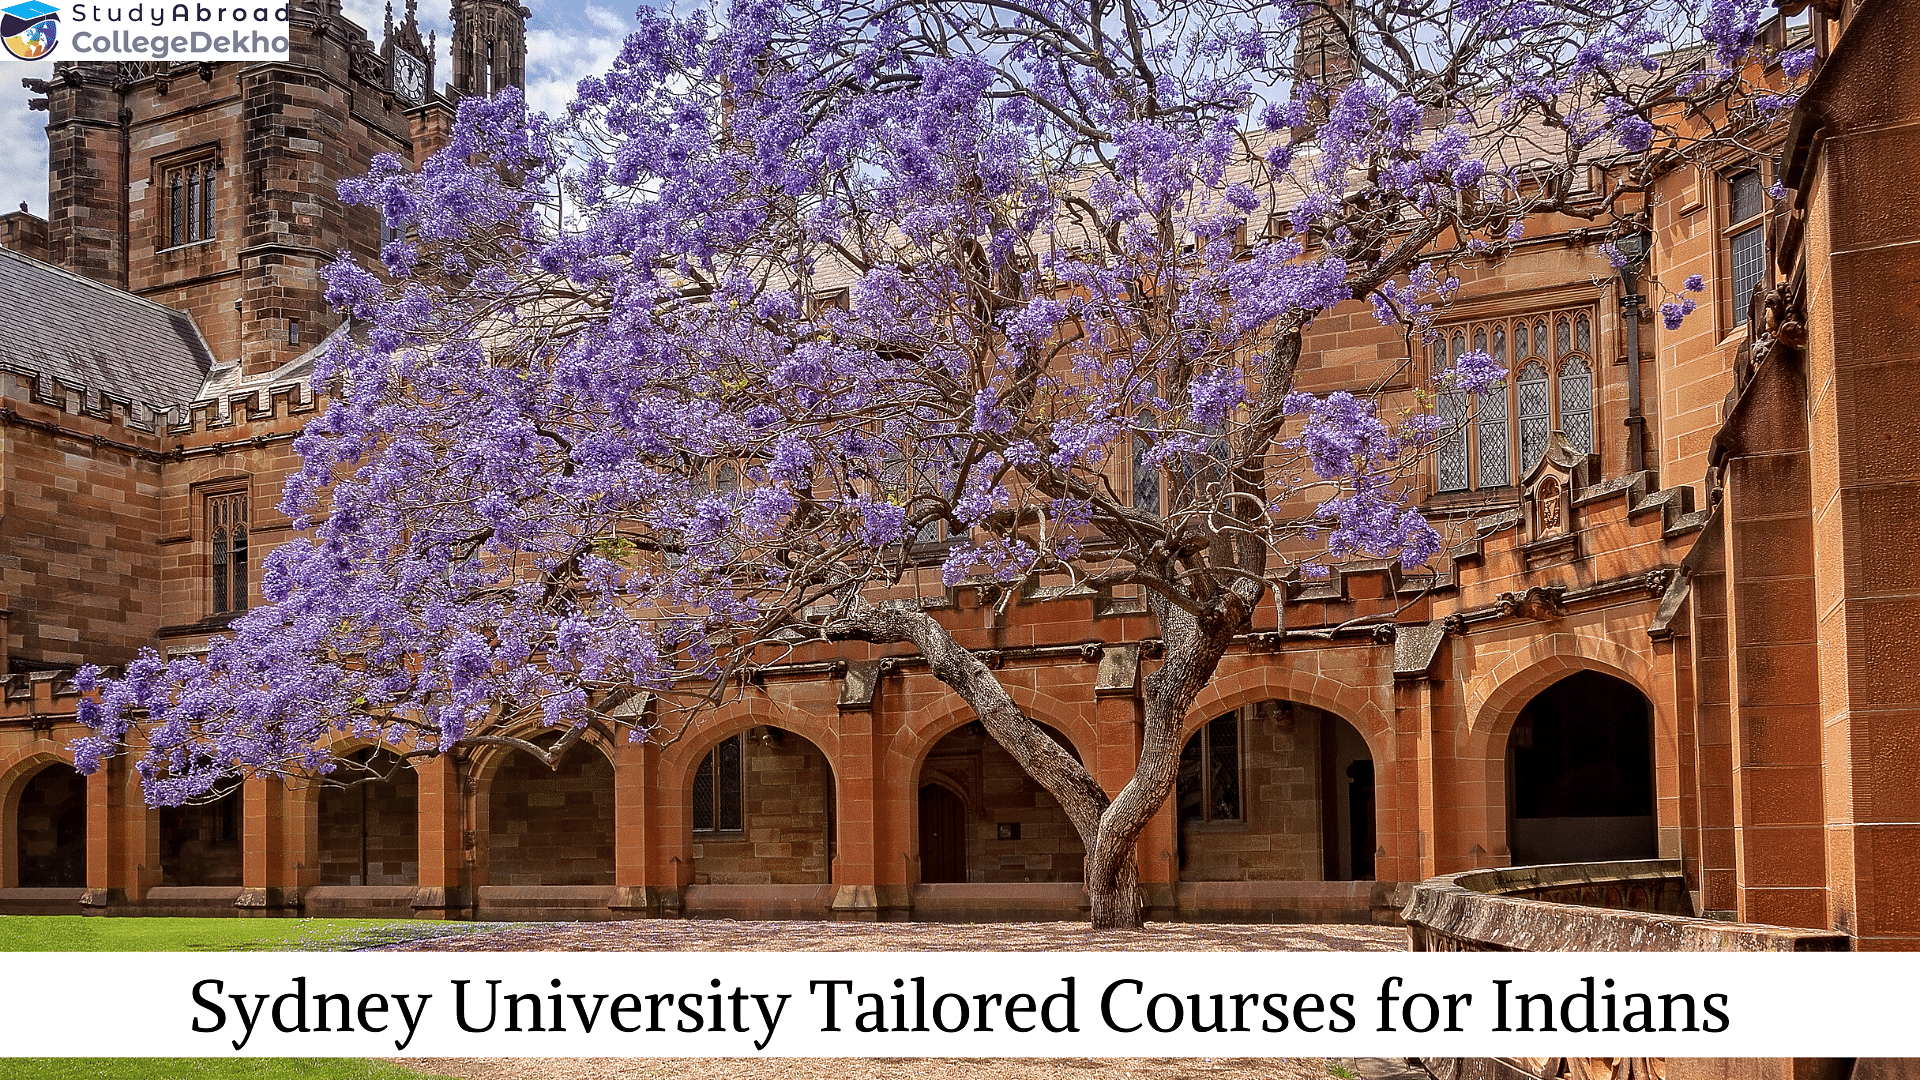 Sydney University Tailored Courses for Indians